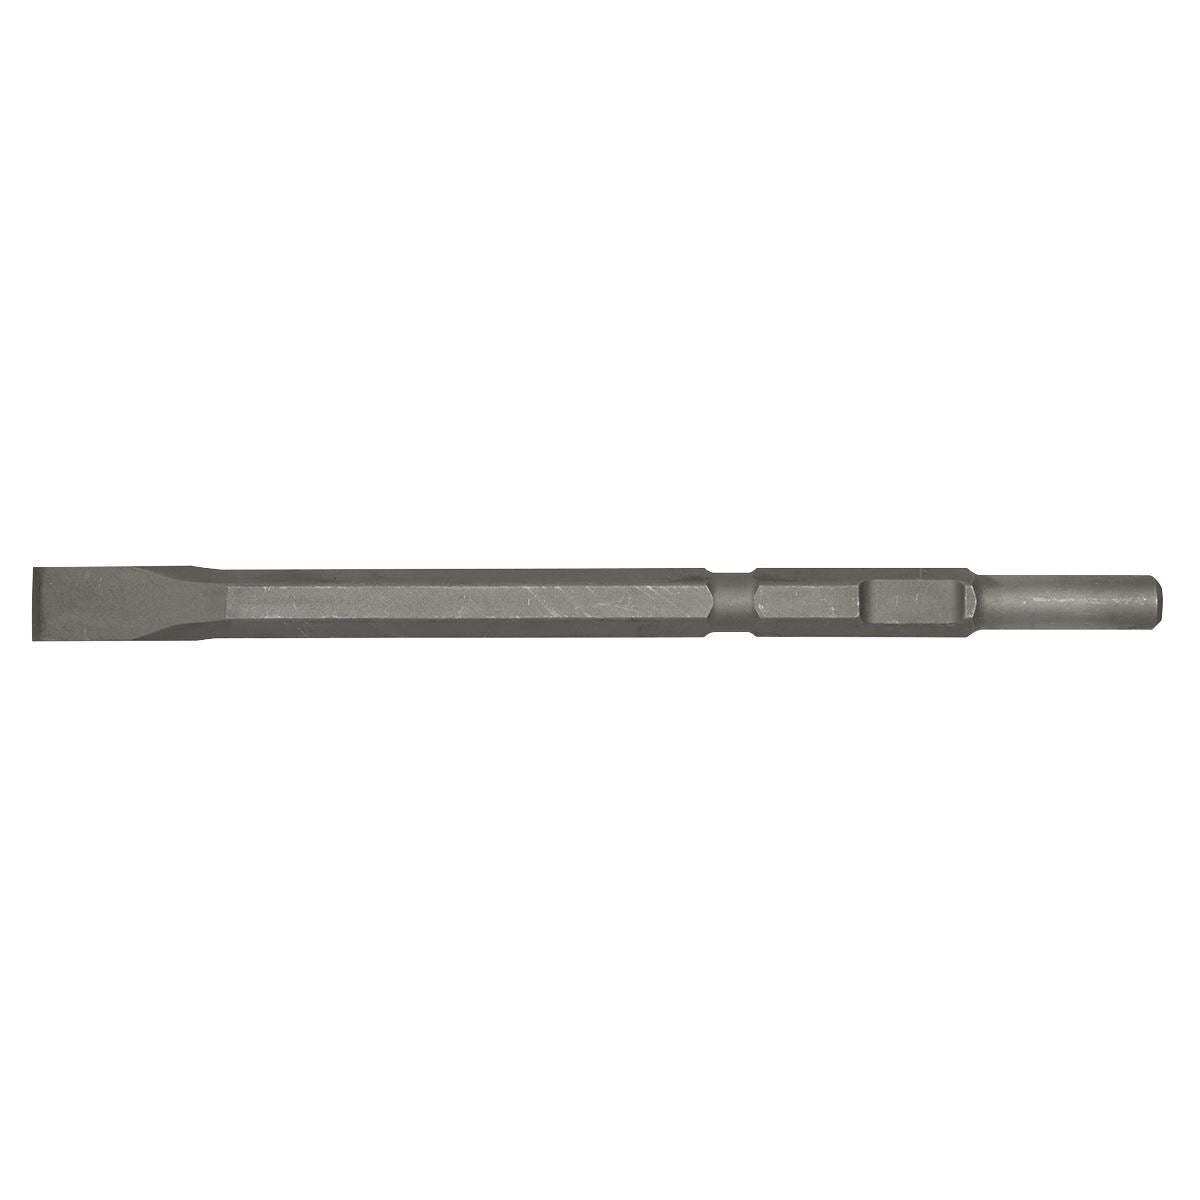 Worksafe by Sealey Chisel 35 x 375mm- Kango 900